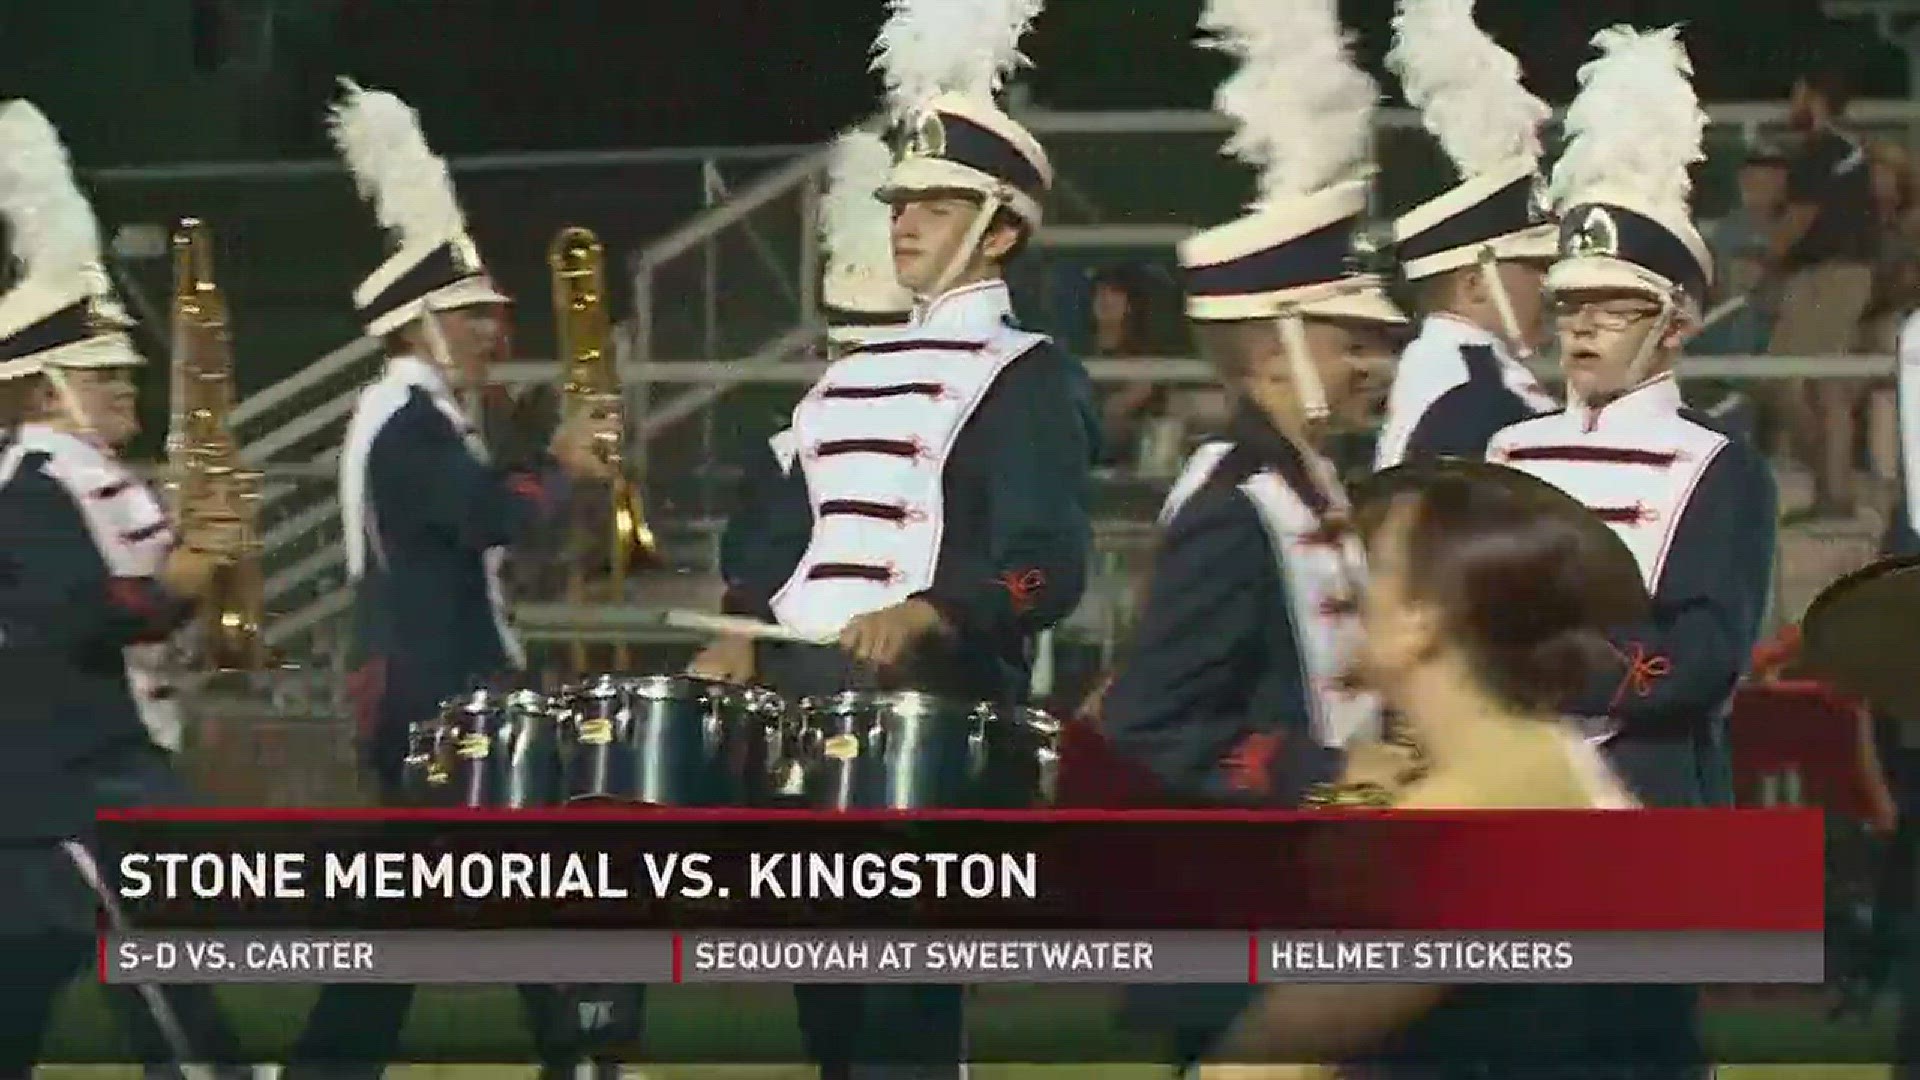 Kingston moves to 5-1 with a 42-15 win over Stone Memorial.